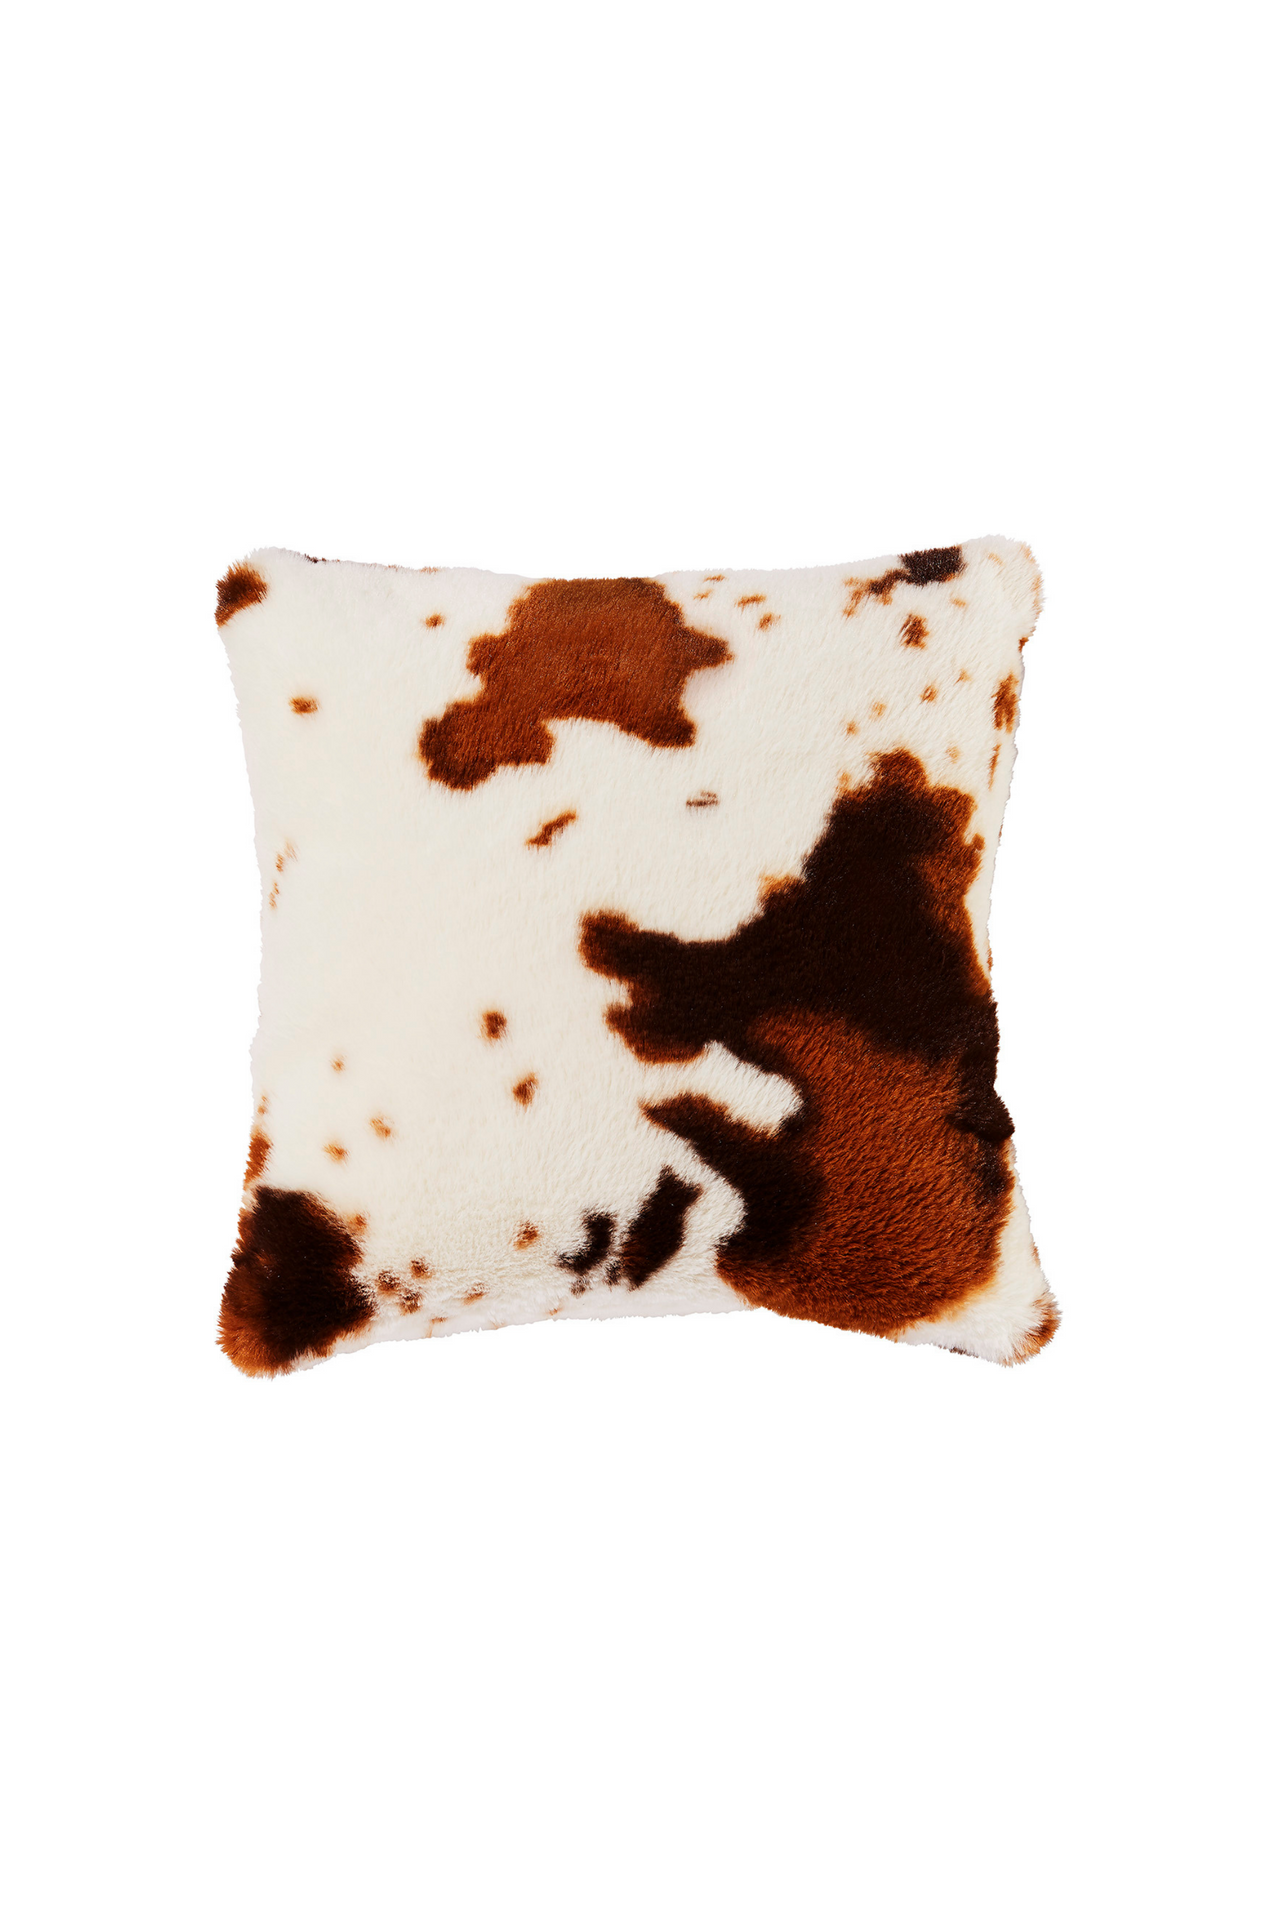 Faux fur throw pillow in brown and white cow print.